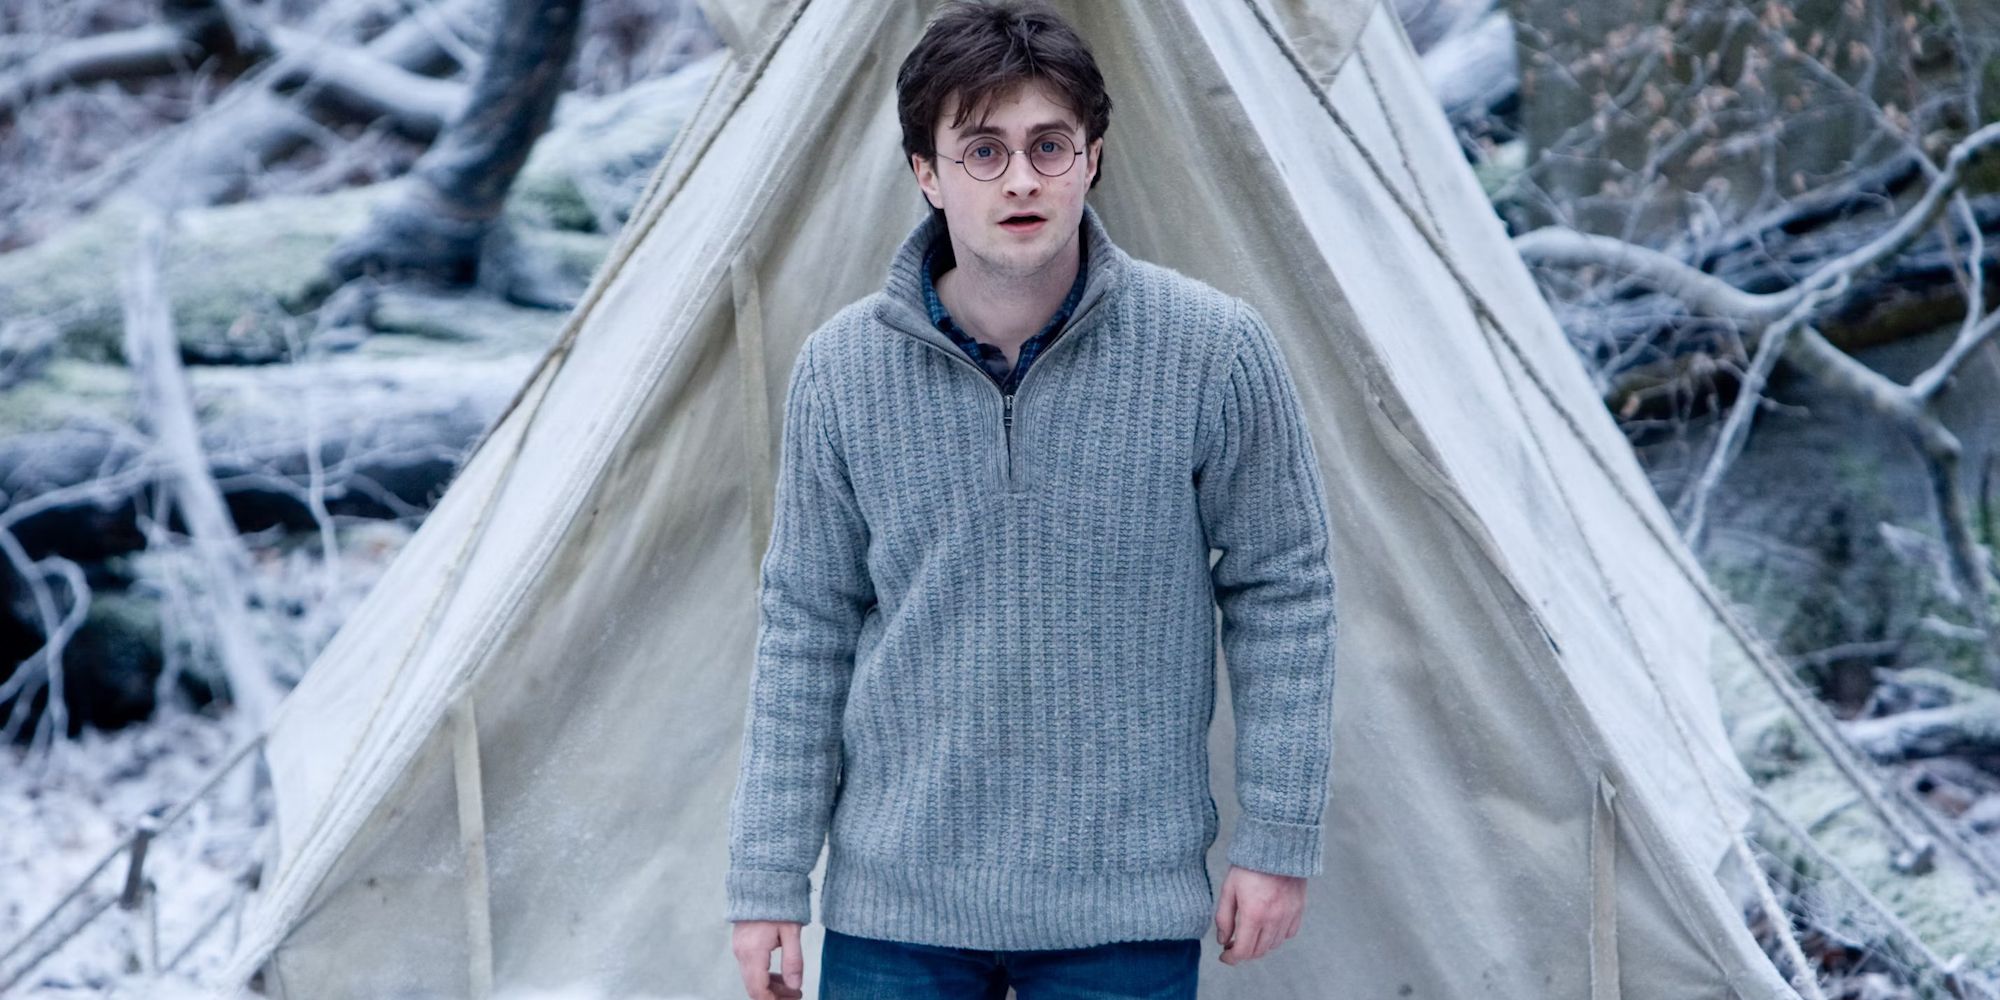 Harry Potter camping in the woods in Harry Potter and the Deathly Hallows Part 1